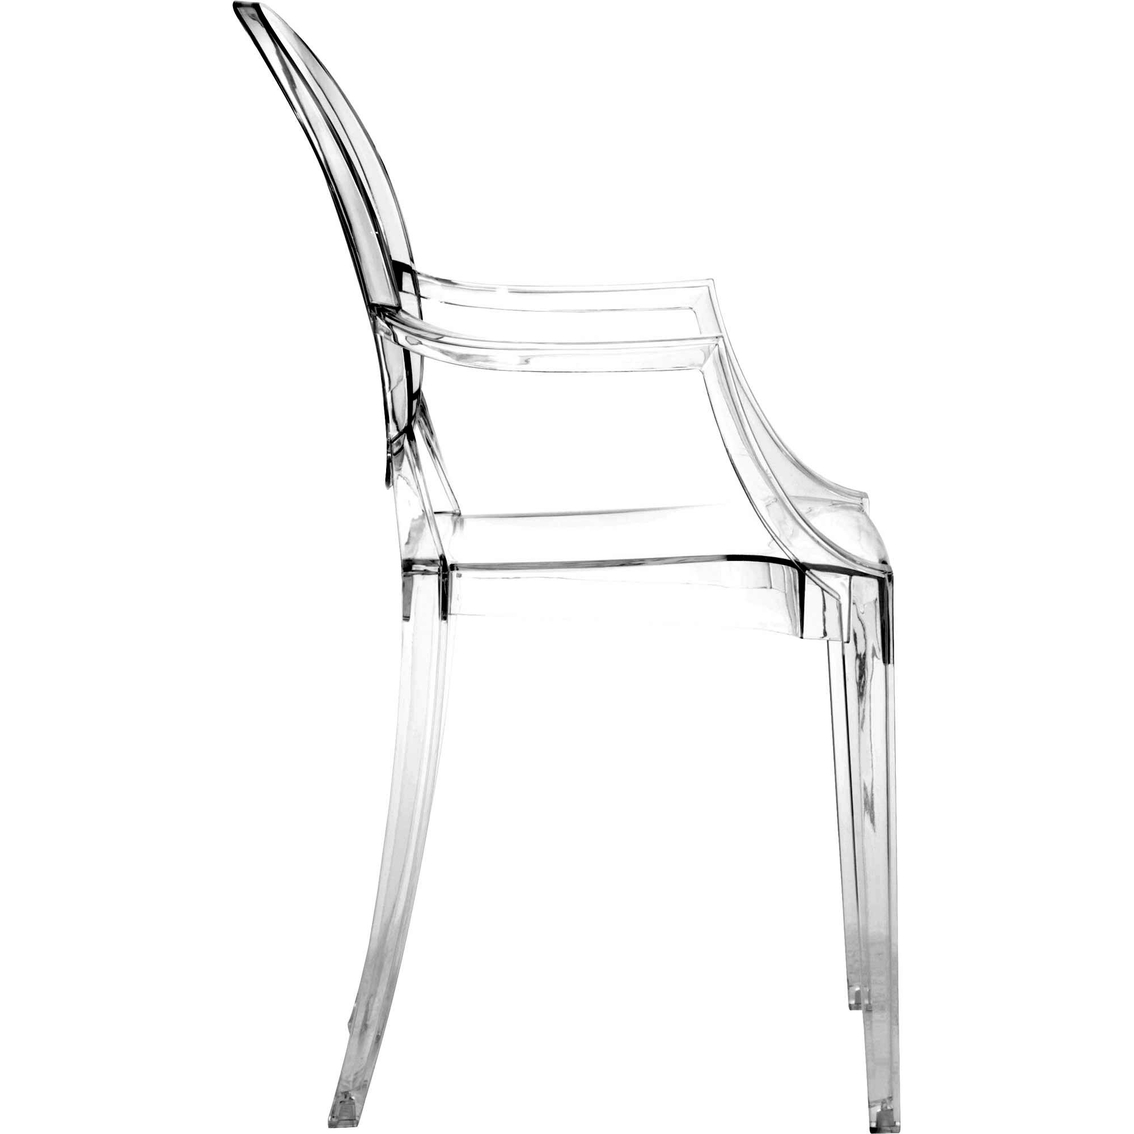 Zuo Anime Dining Chair Transparent 4 Pk. - Image 3 of 4